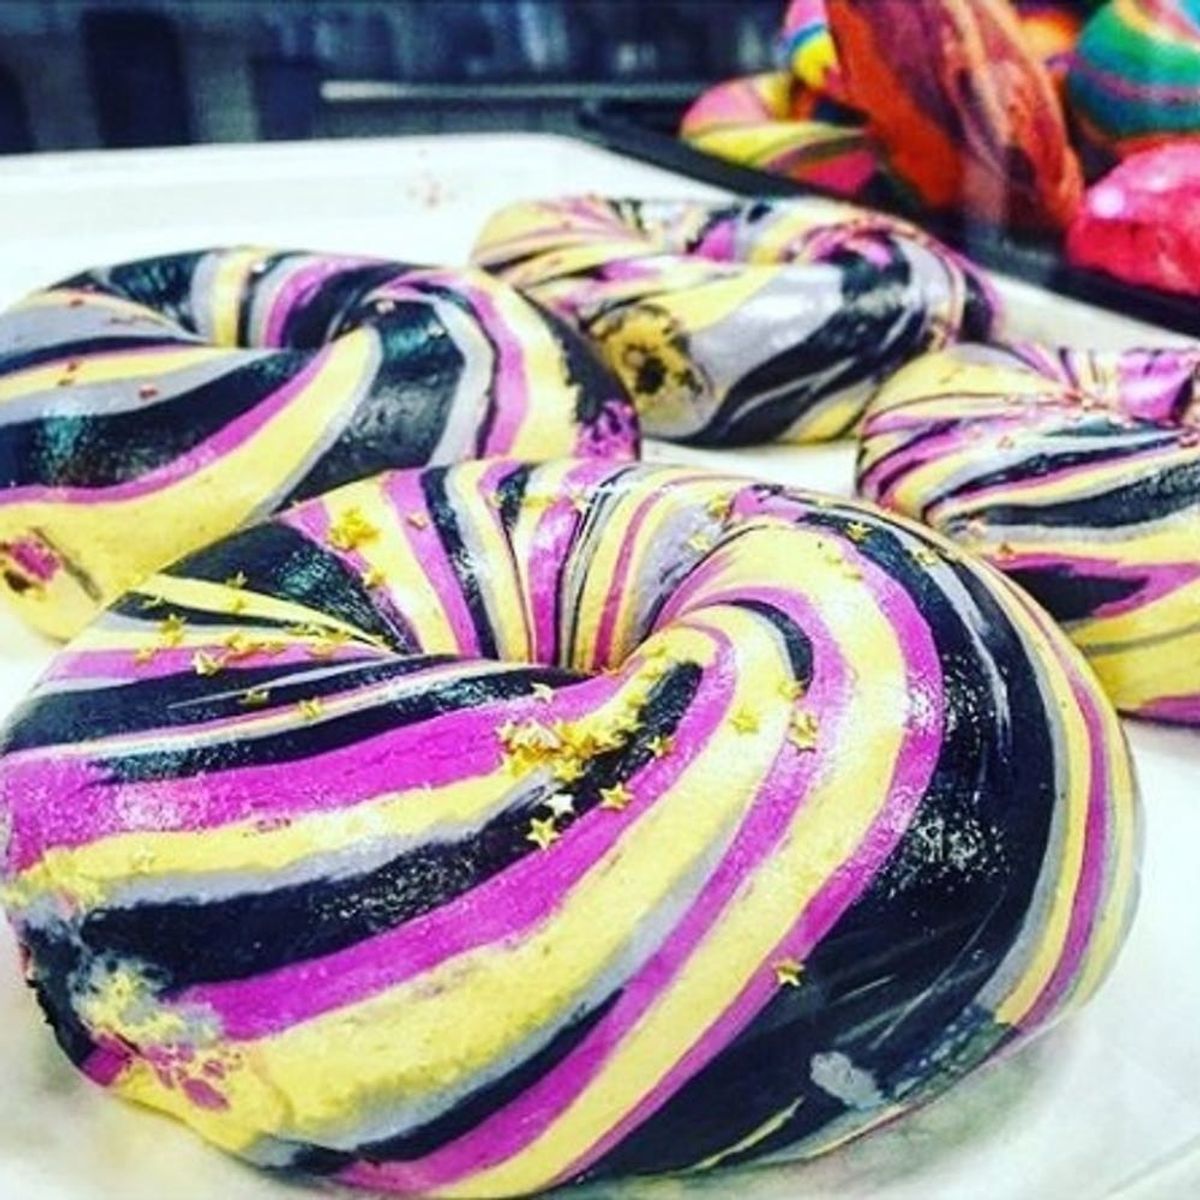 This Bagel Art Takes the Rainbow Trend to an Entirely New Level